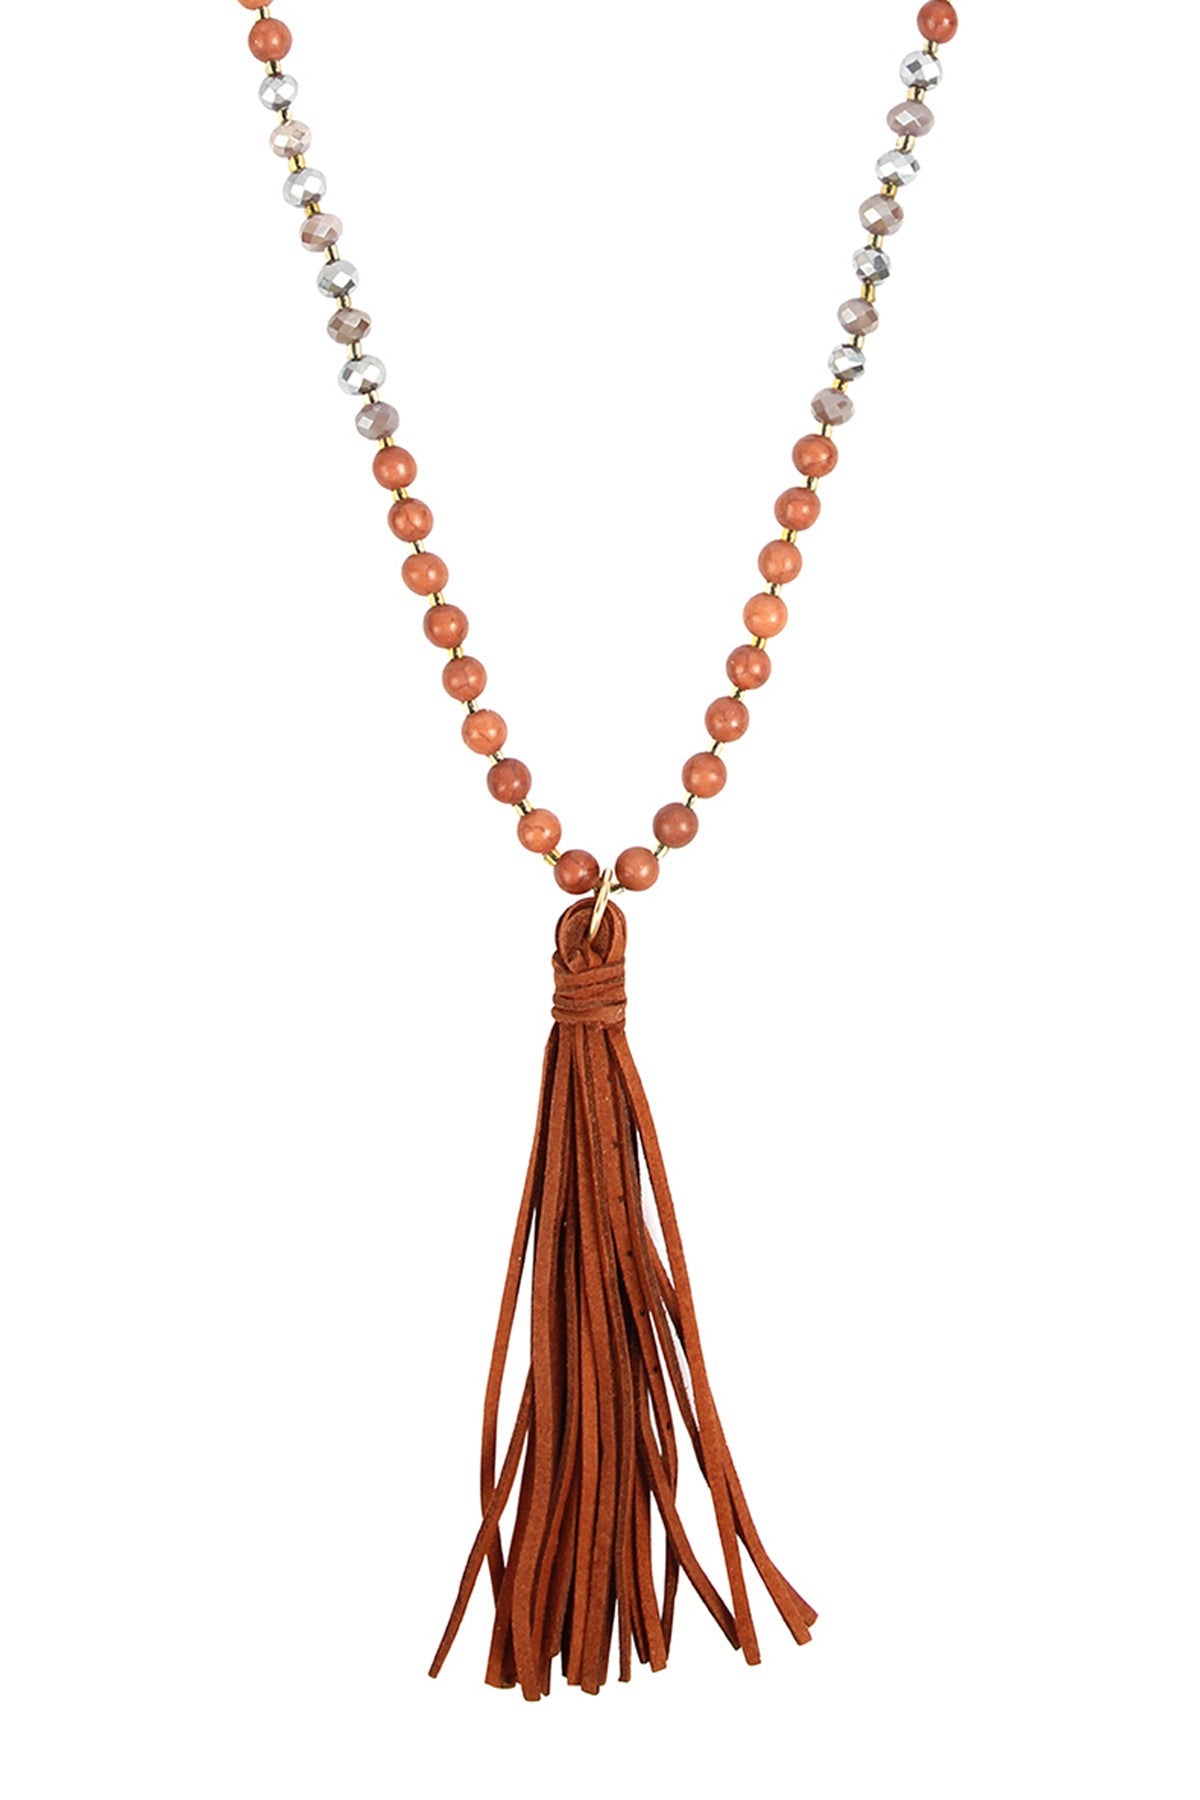 BEADED NECKLACE WITH LEATHER TASSEL/6PCS